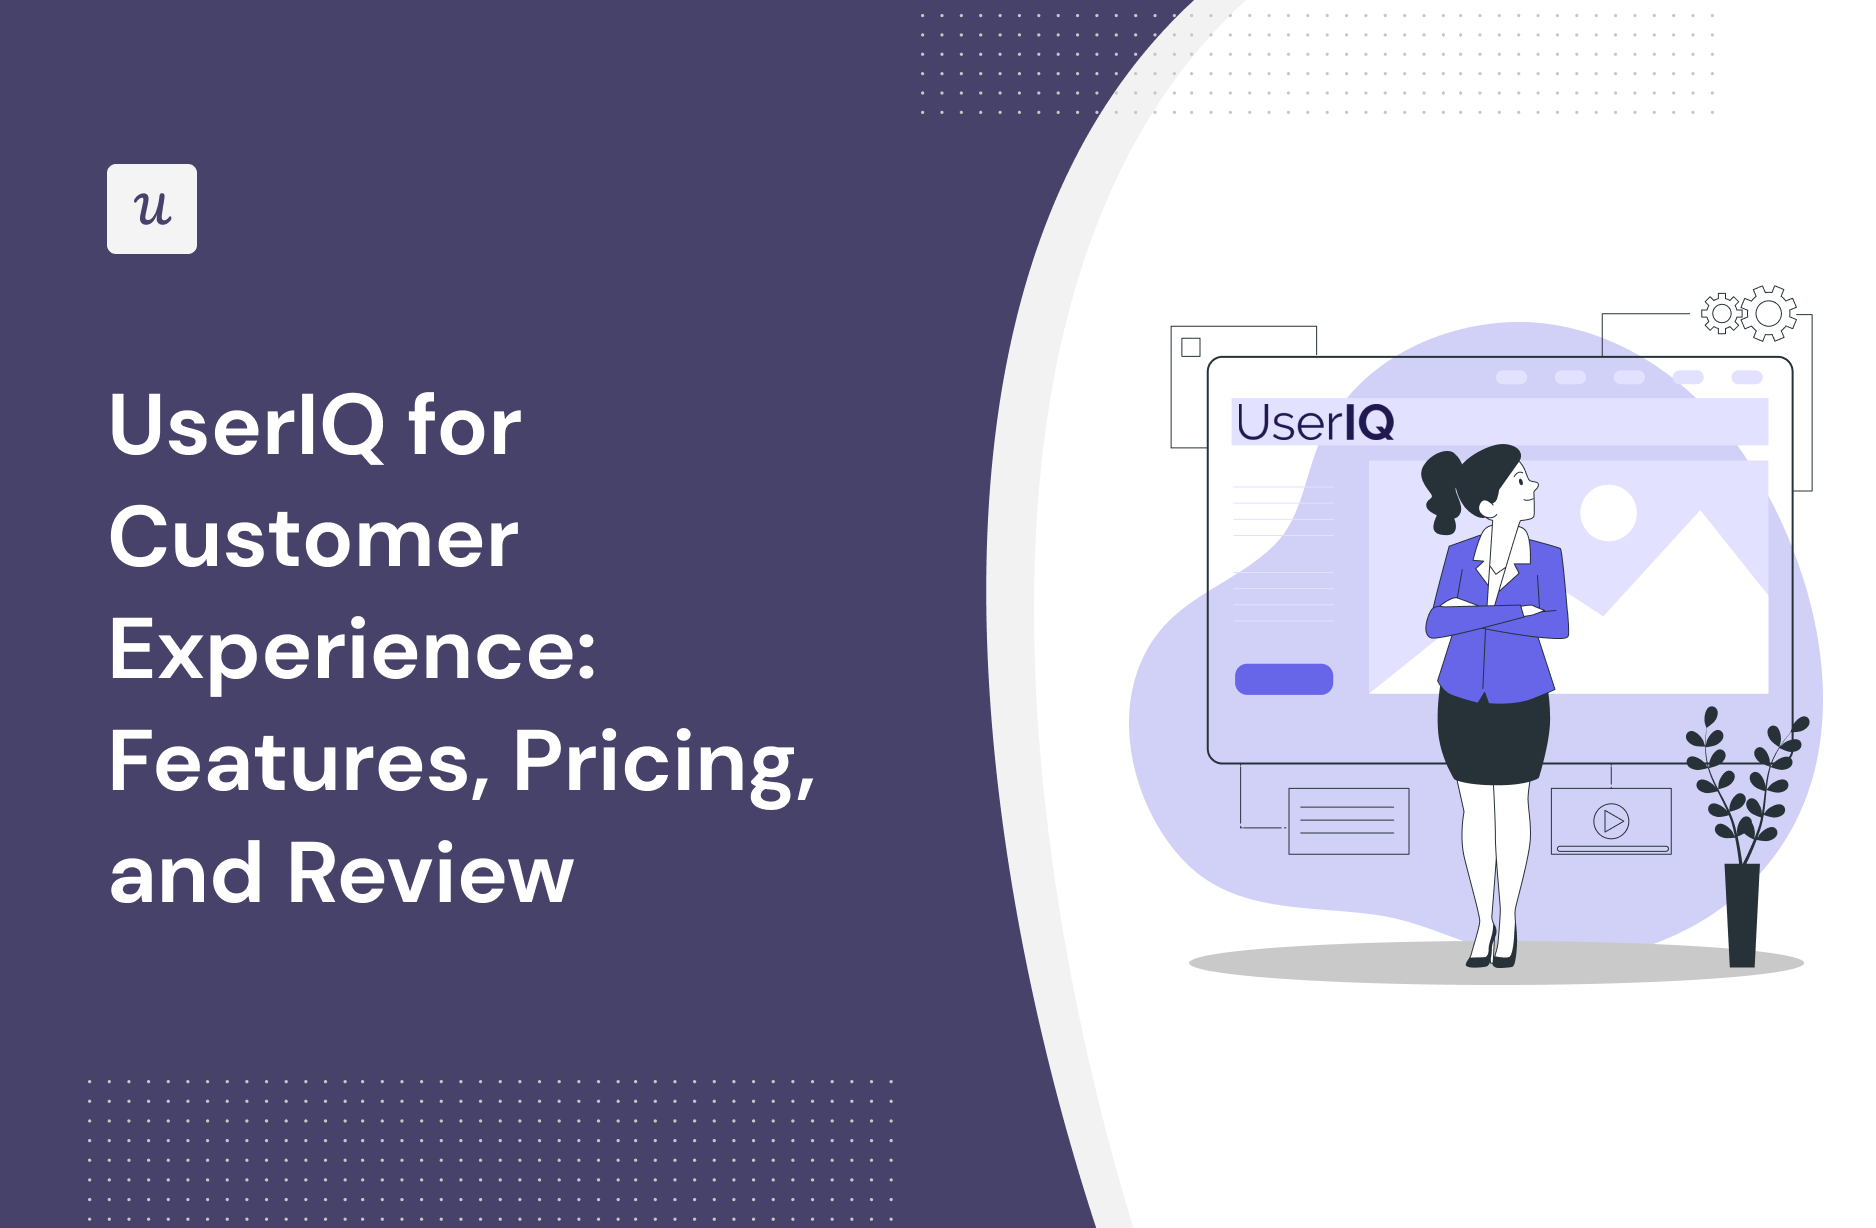 UserIQ for Customer Experience: Features, Pricing, and Review